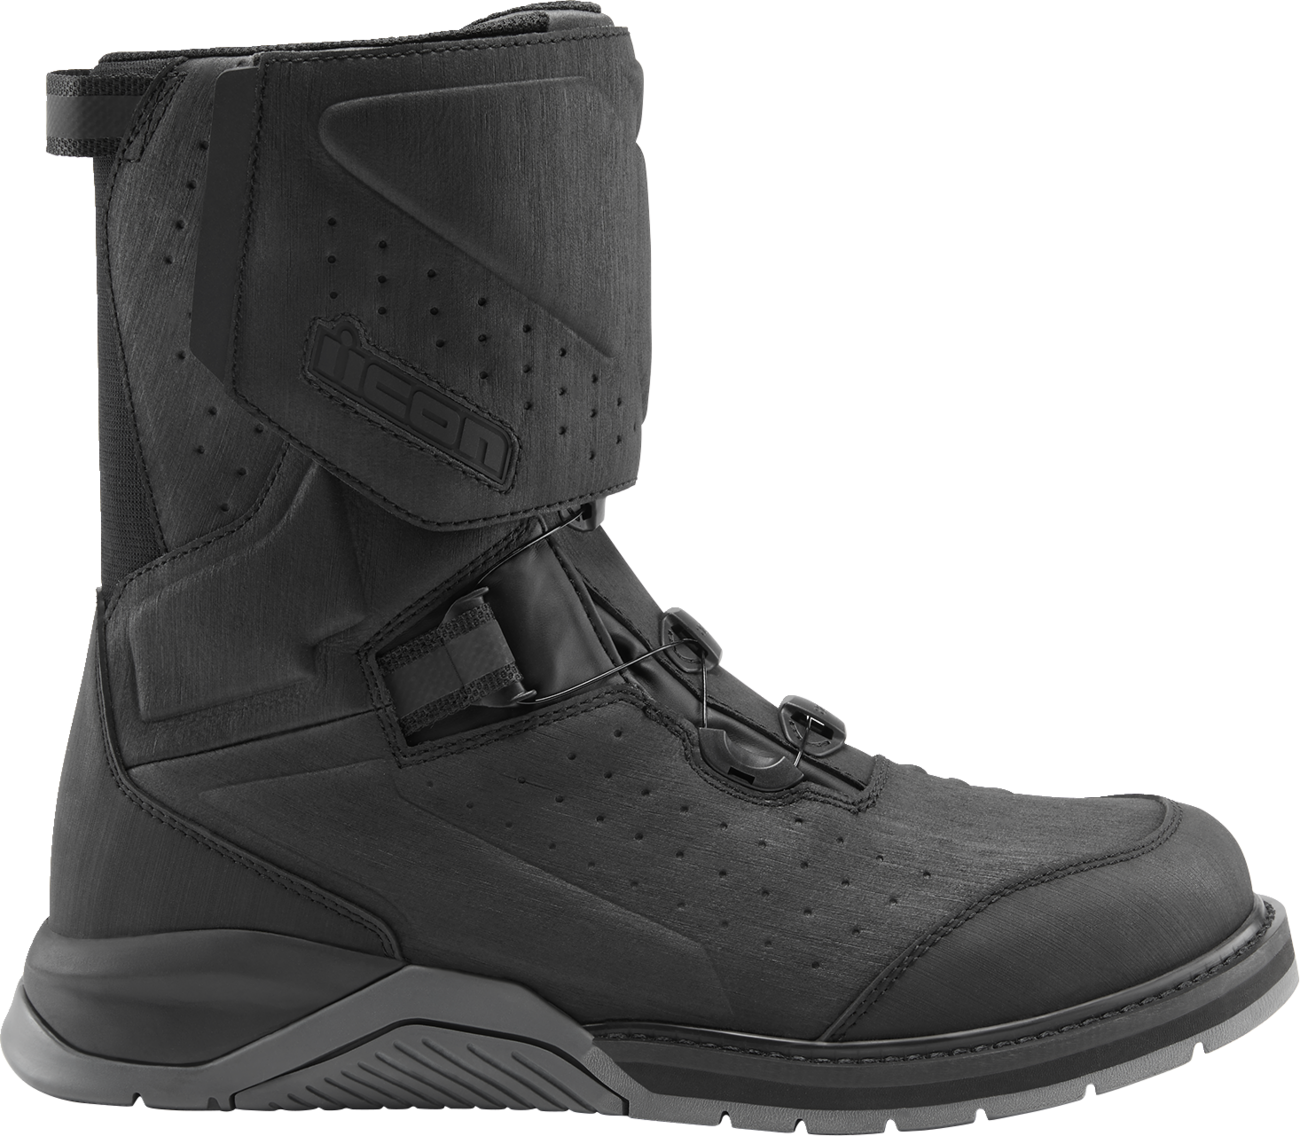 ICON Alcan Waterproof Boots - Black - Size 7 3403-1232